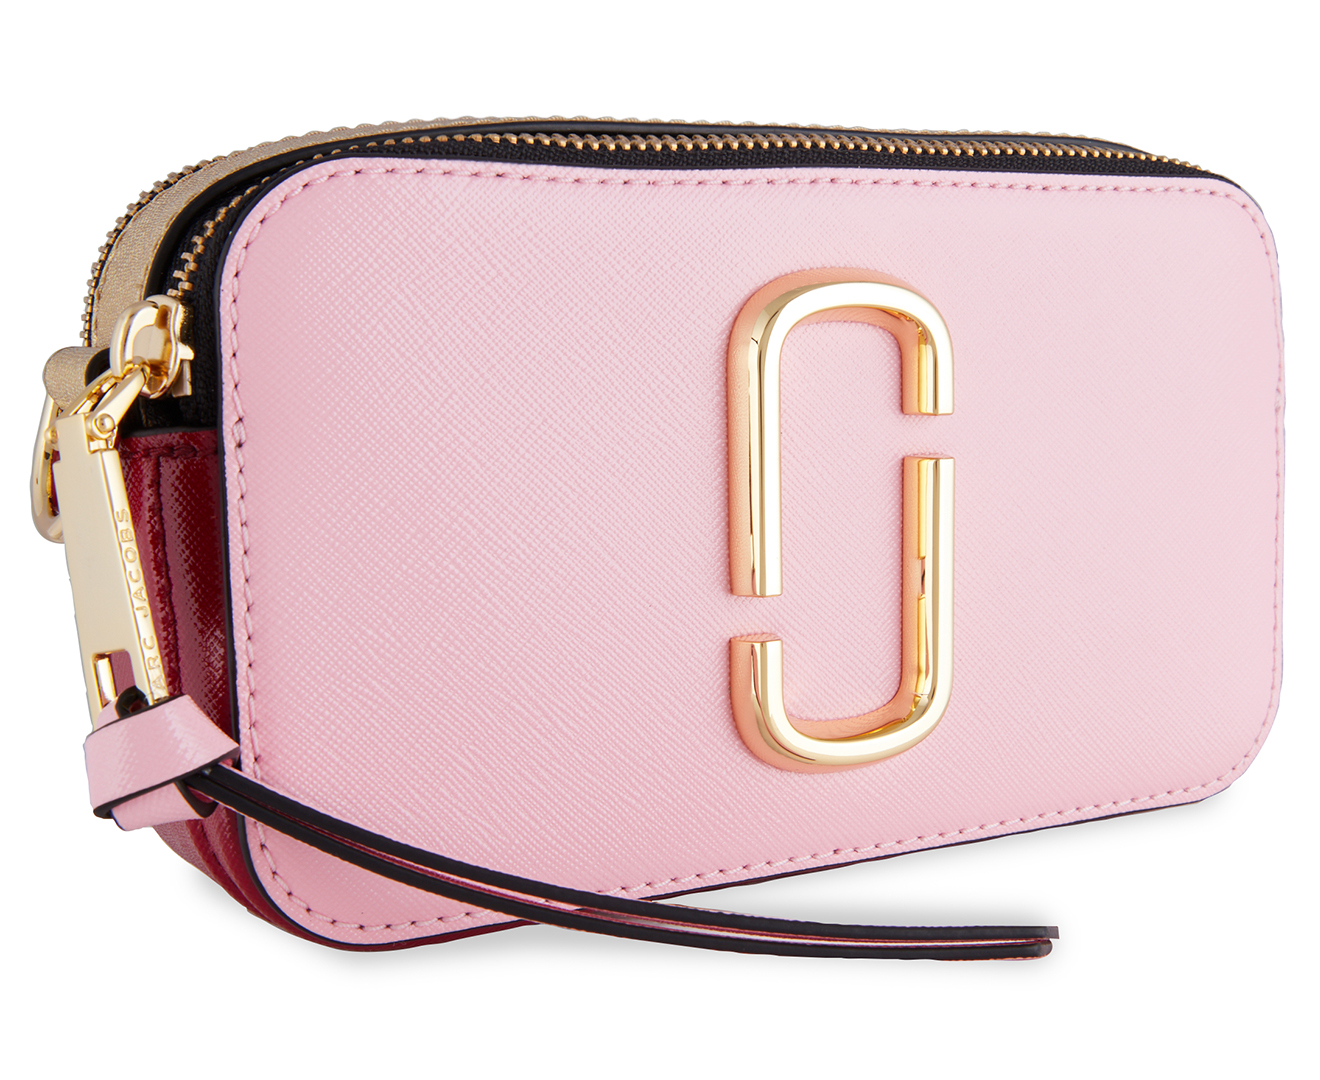 Marc Jacobs Snapshot Camera Crossbody Bag - Baby Pink/Red | Catch.co.nz